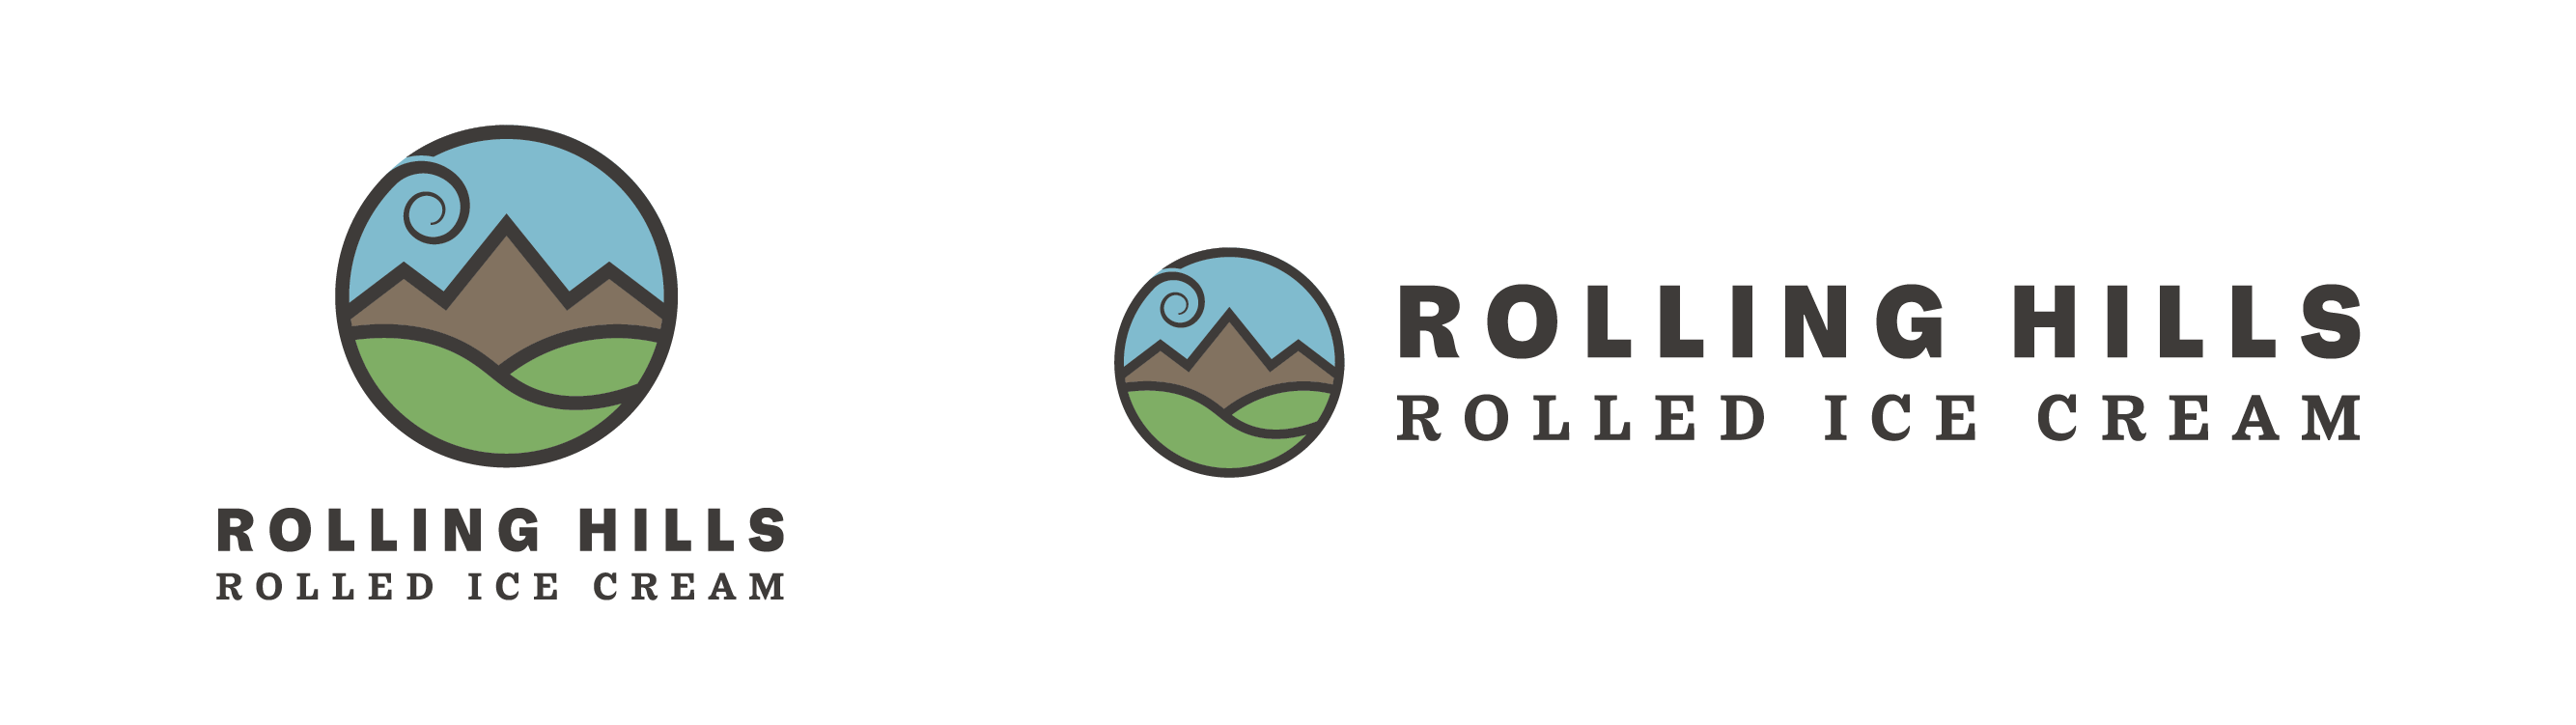 Rolling Hills Rolled Ice Cream business logo and landscape logo